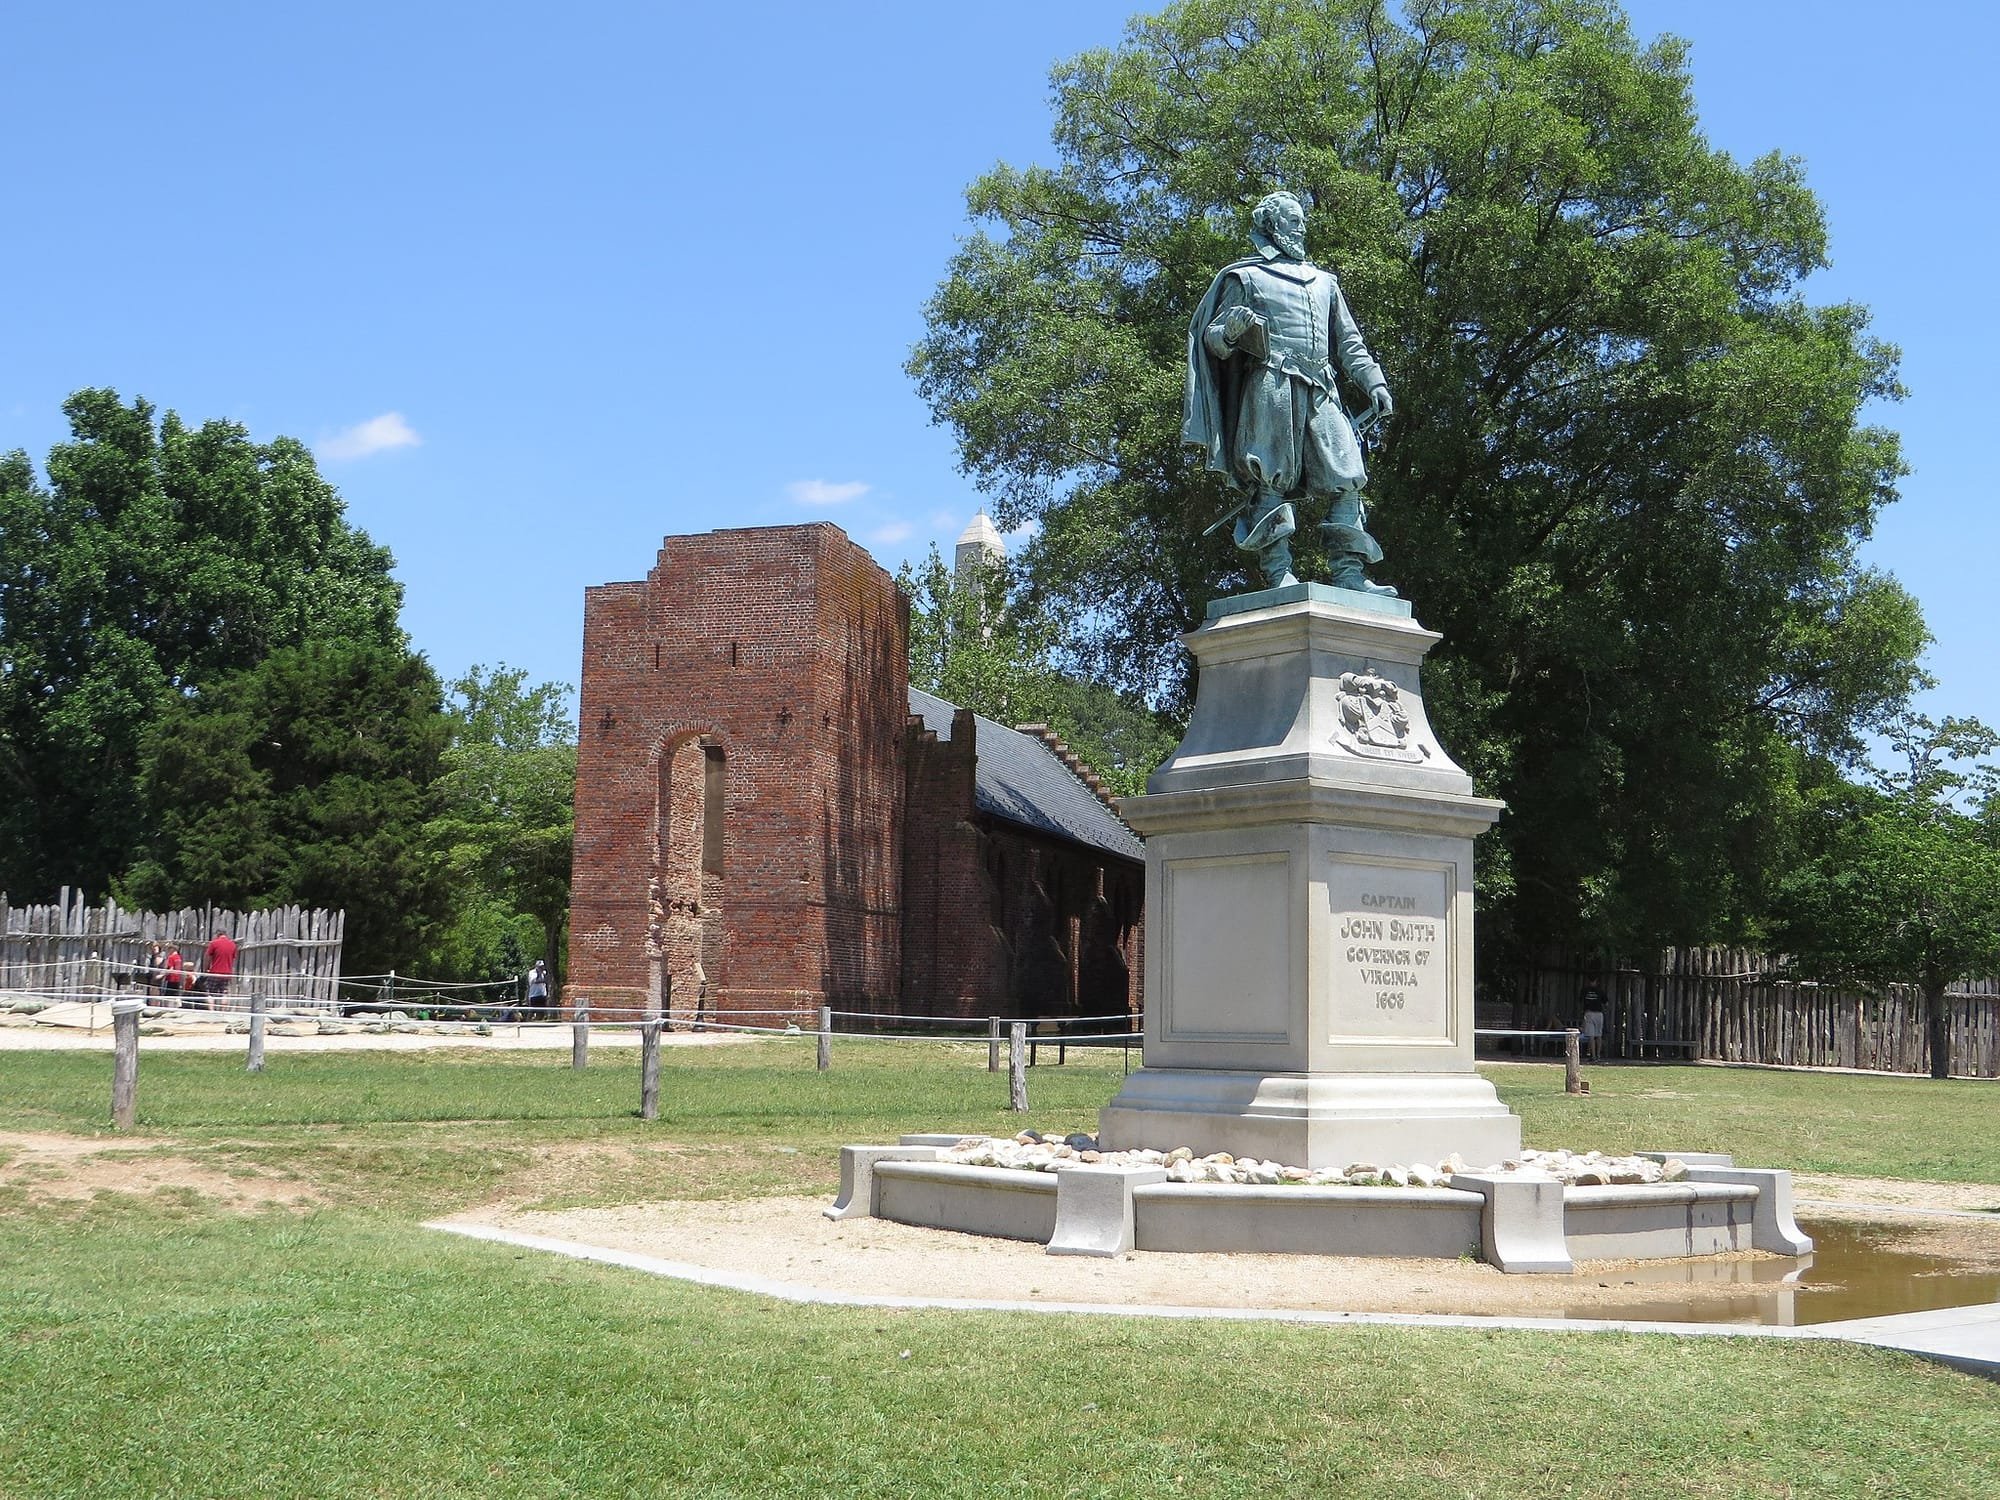 "File:Captain John Smith Statue, Historic Jamestowne, Colonial National Historical Park, Jamestown, Virginia (14239039490).jpg" by Ken Lund from Reno, Nevada, USA is licensed under CC BY-SA 2.0.